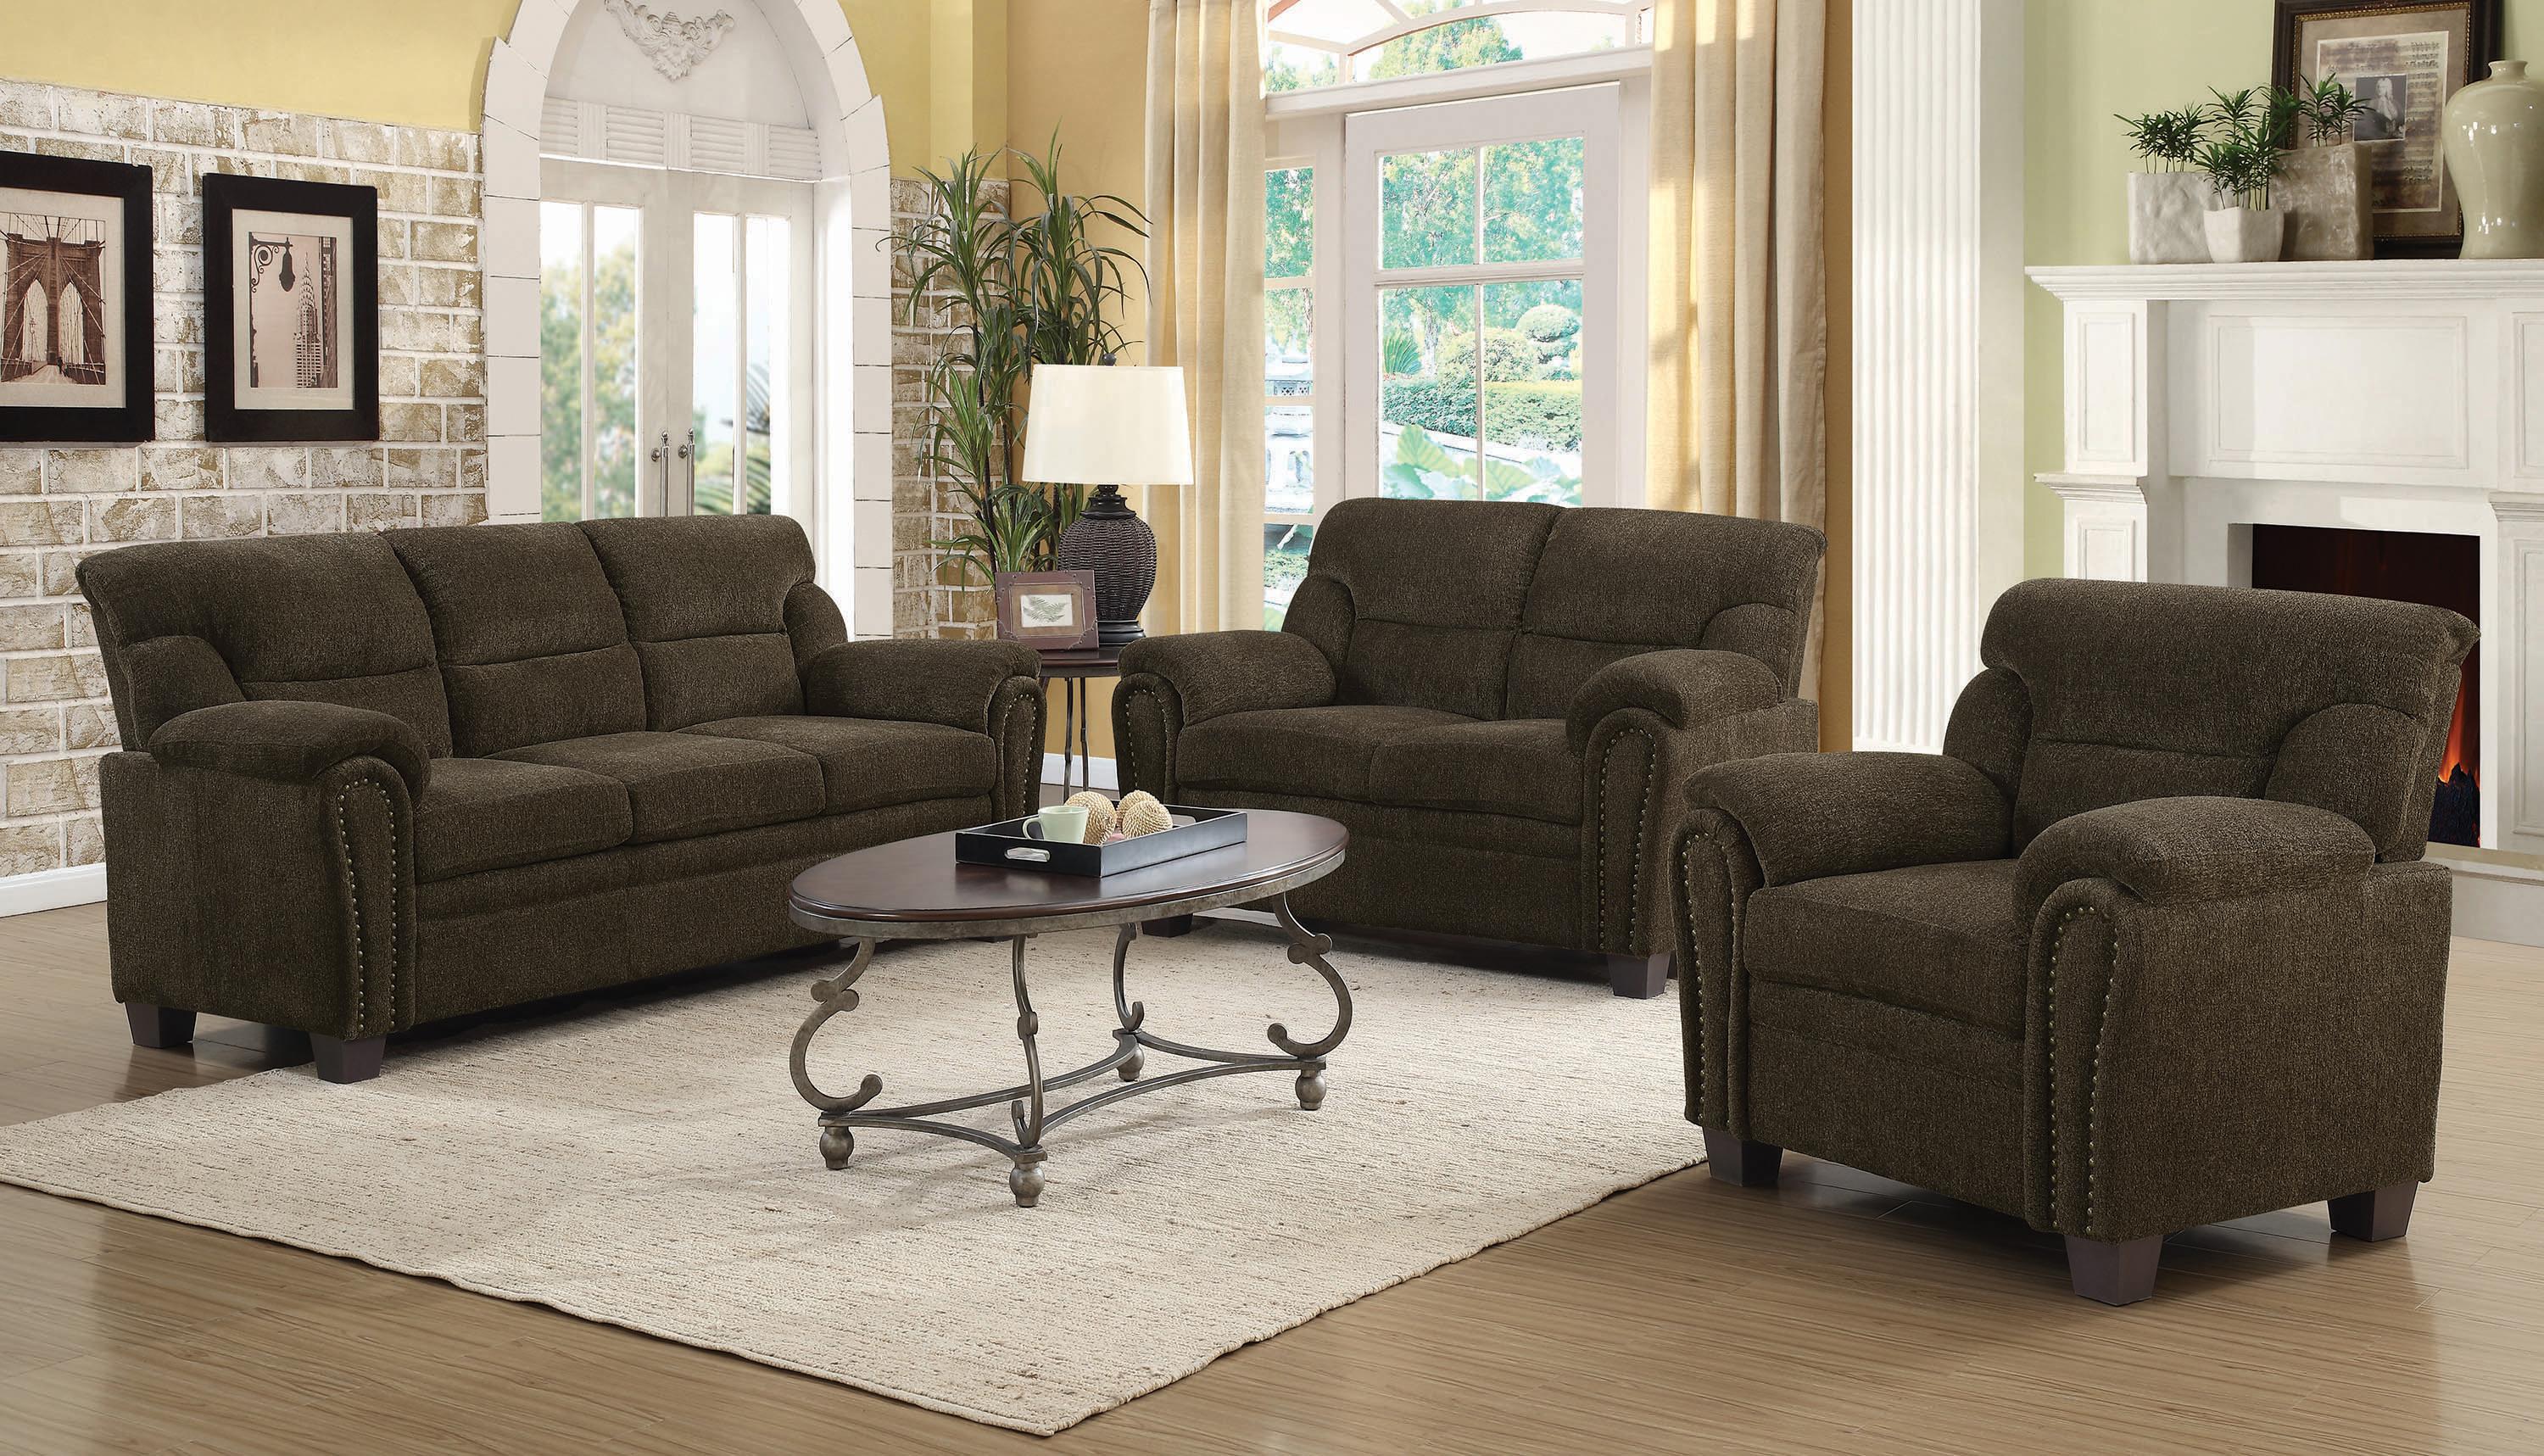 

    
Transitional Brown Chenille Living Room Set 3pcs Coaster 506571-S3 Clemintine
